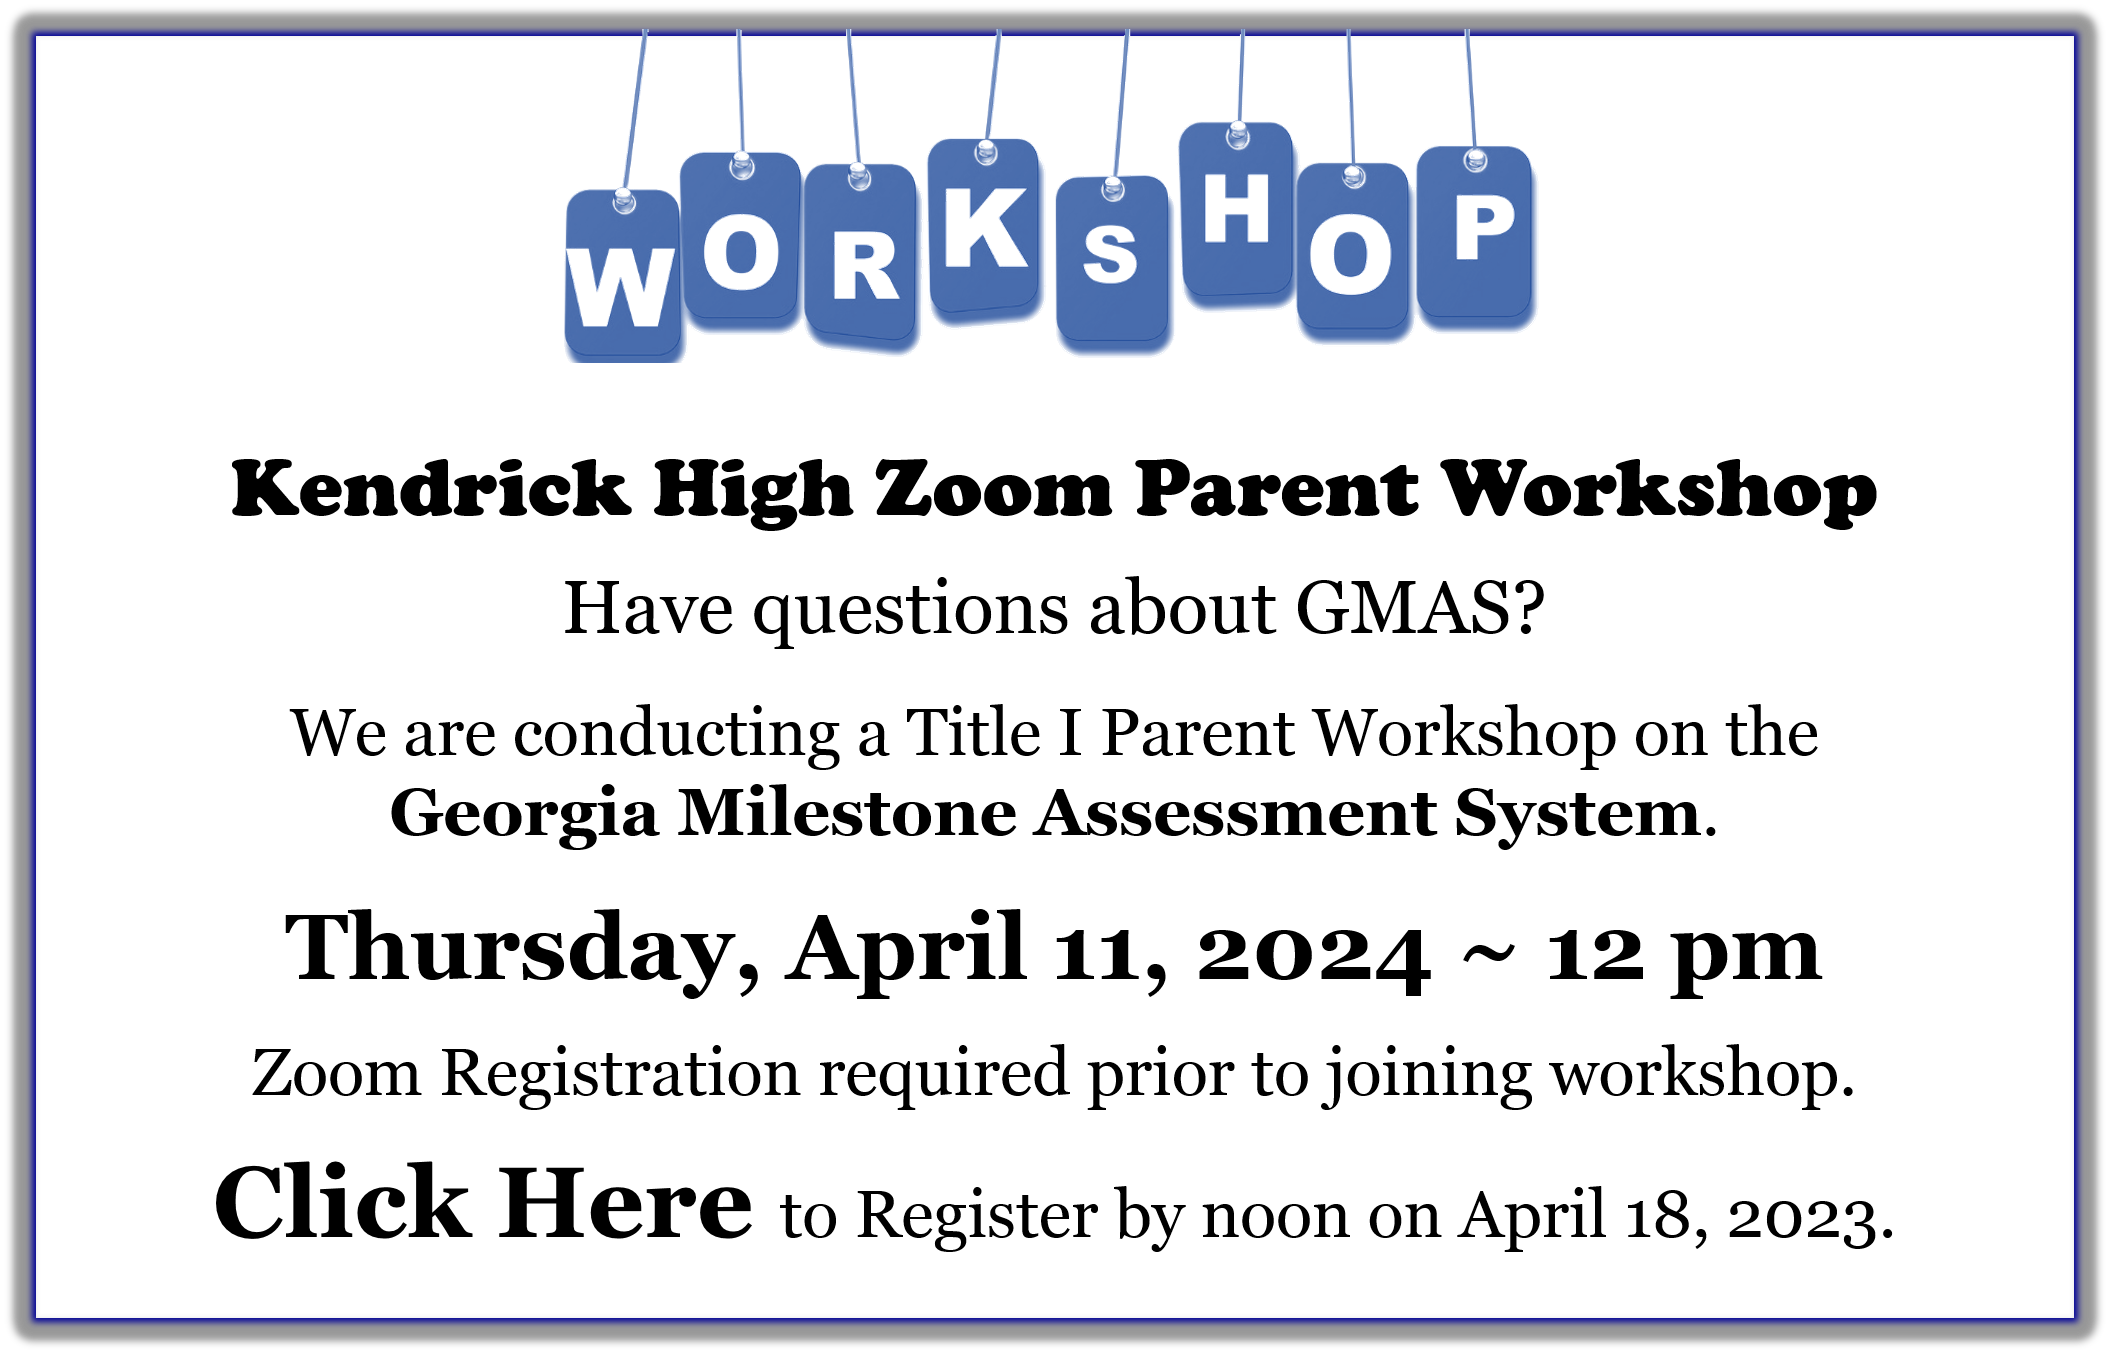 Kendrick High Zoom Parent Workshop  Have questions about GMAS?  We are conducting a Title I Parent Workshop on the Georgia Milestone Assessment System.  Thursday, April 11, 2024 ~ 12 pm   Zoom Registration required prior to joining workshop.  Click Here to Register by noon on April 18, 2023.